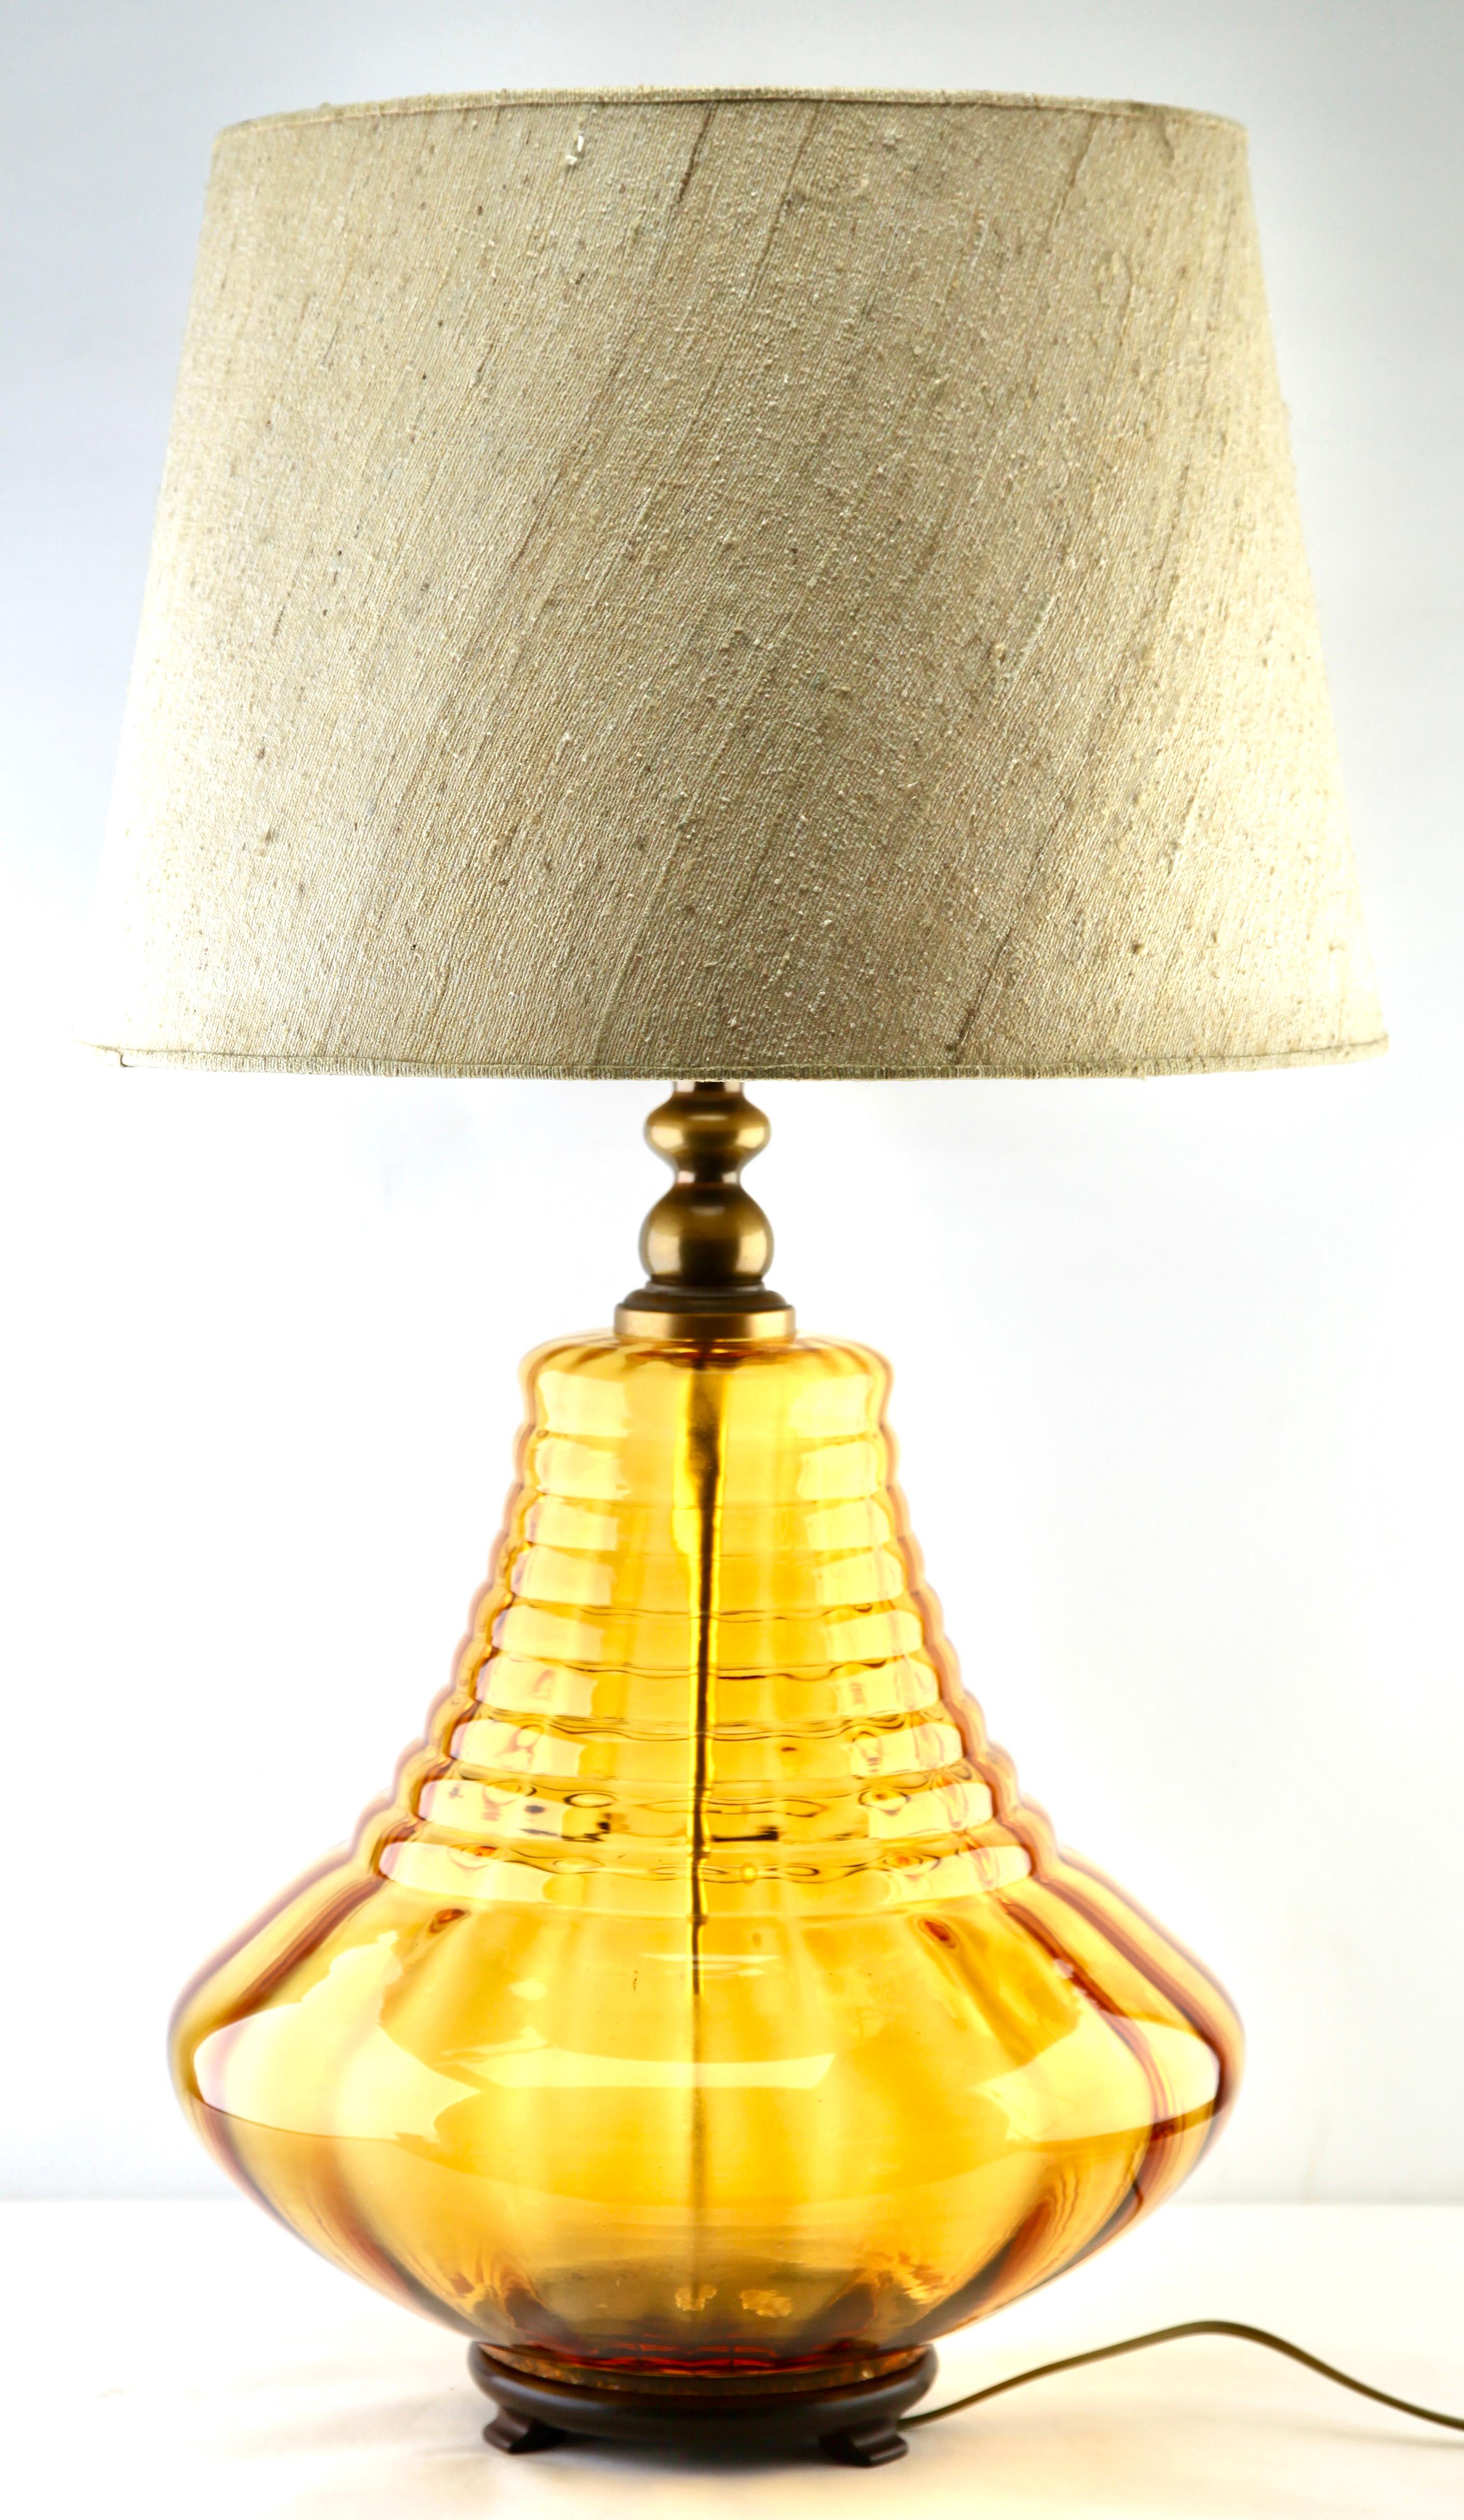 Empoli Glass Table Lamp with Optical Vertical-Horizontal Ribs Light Amber Tint In Good Condition For Sale In Verviers, BE